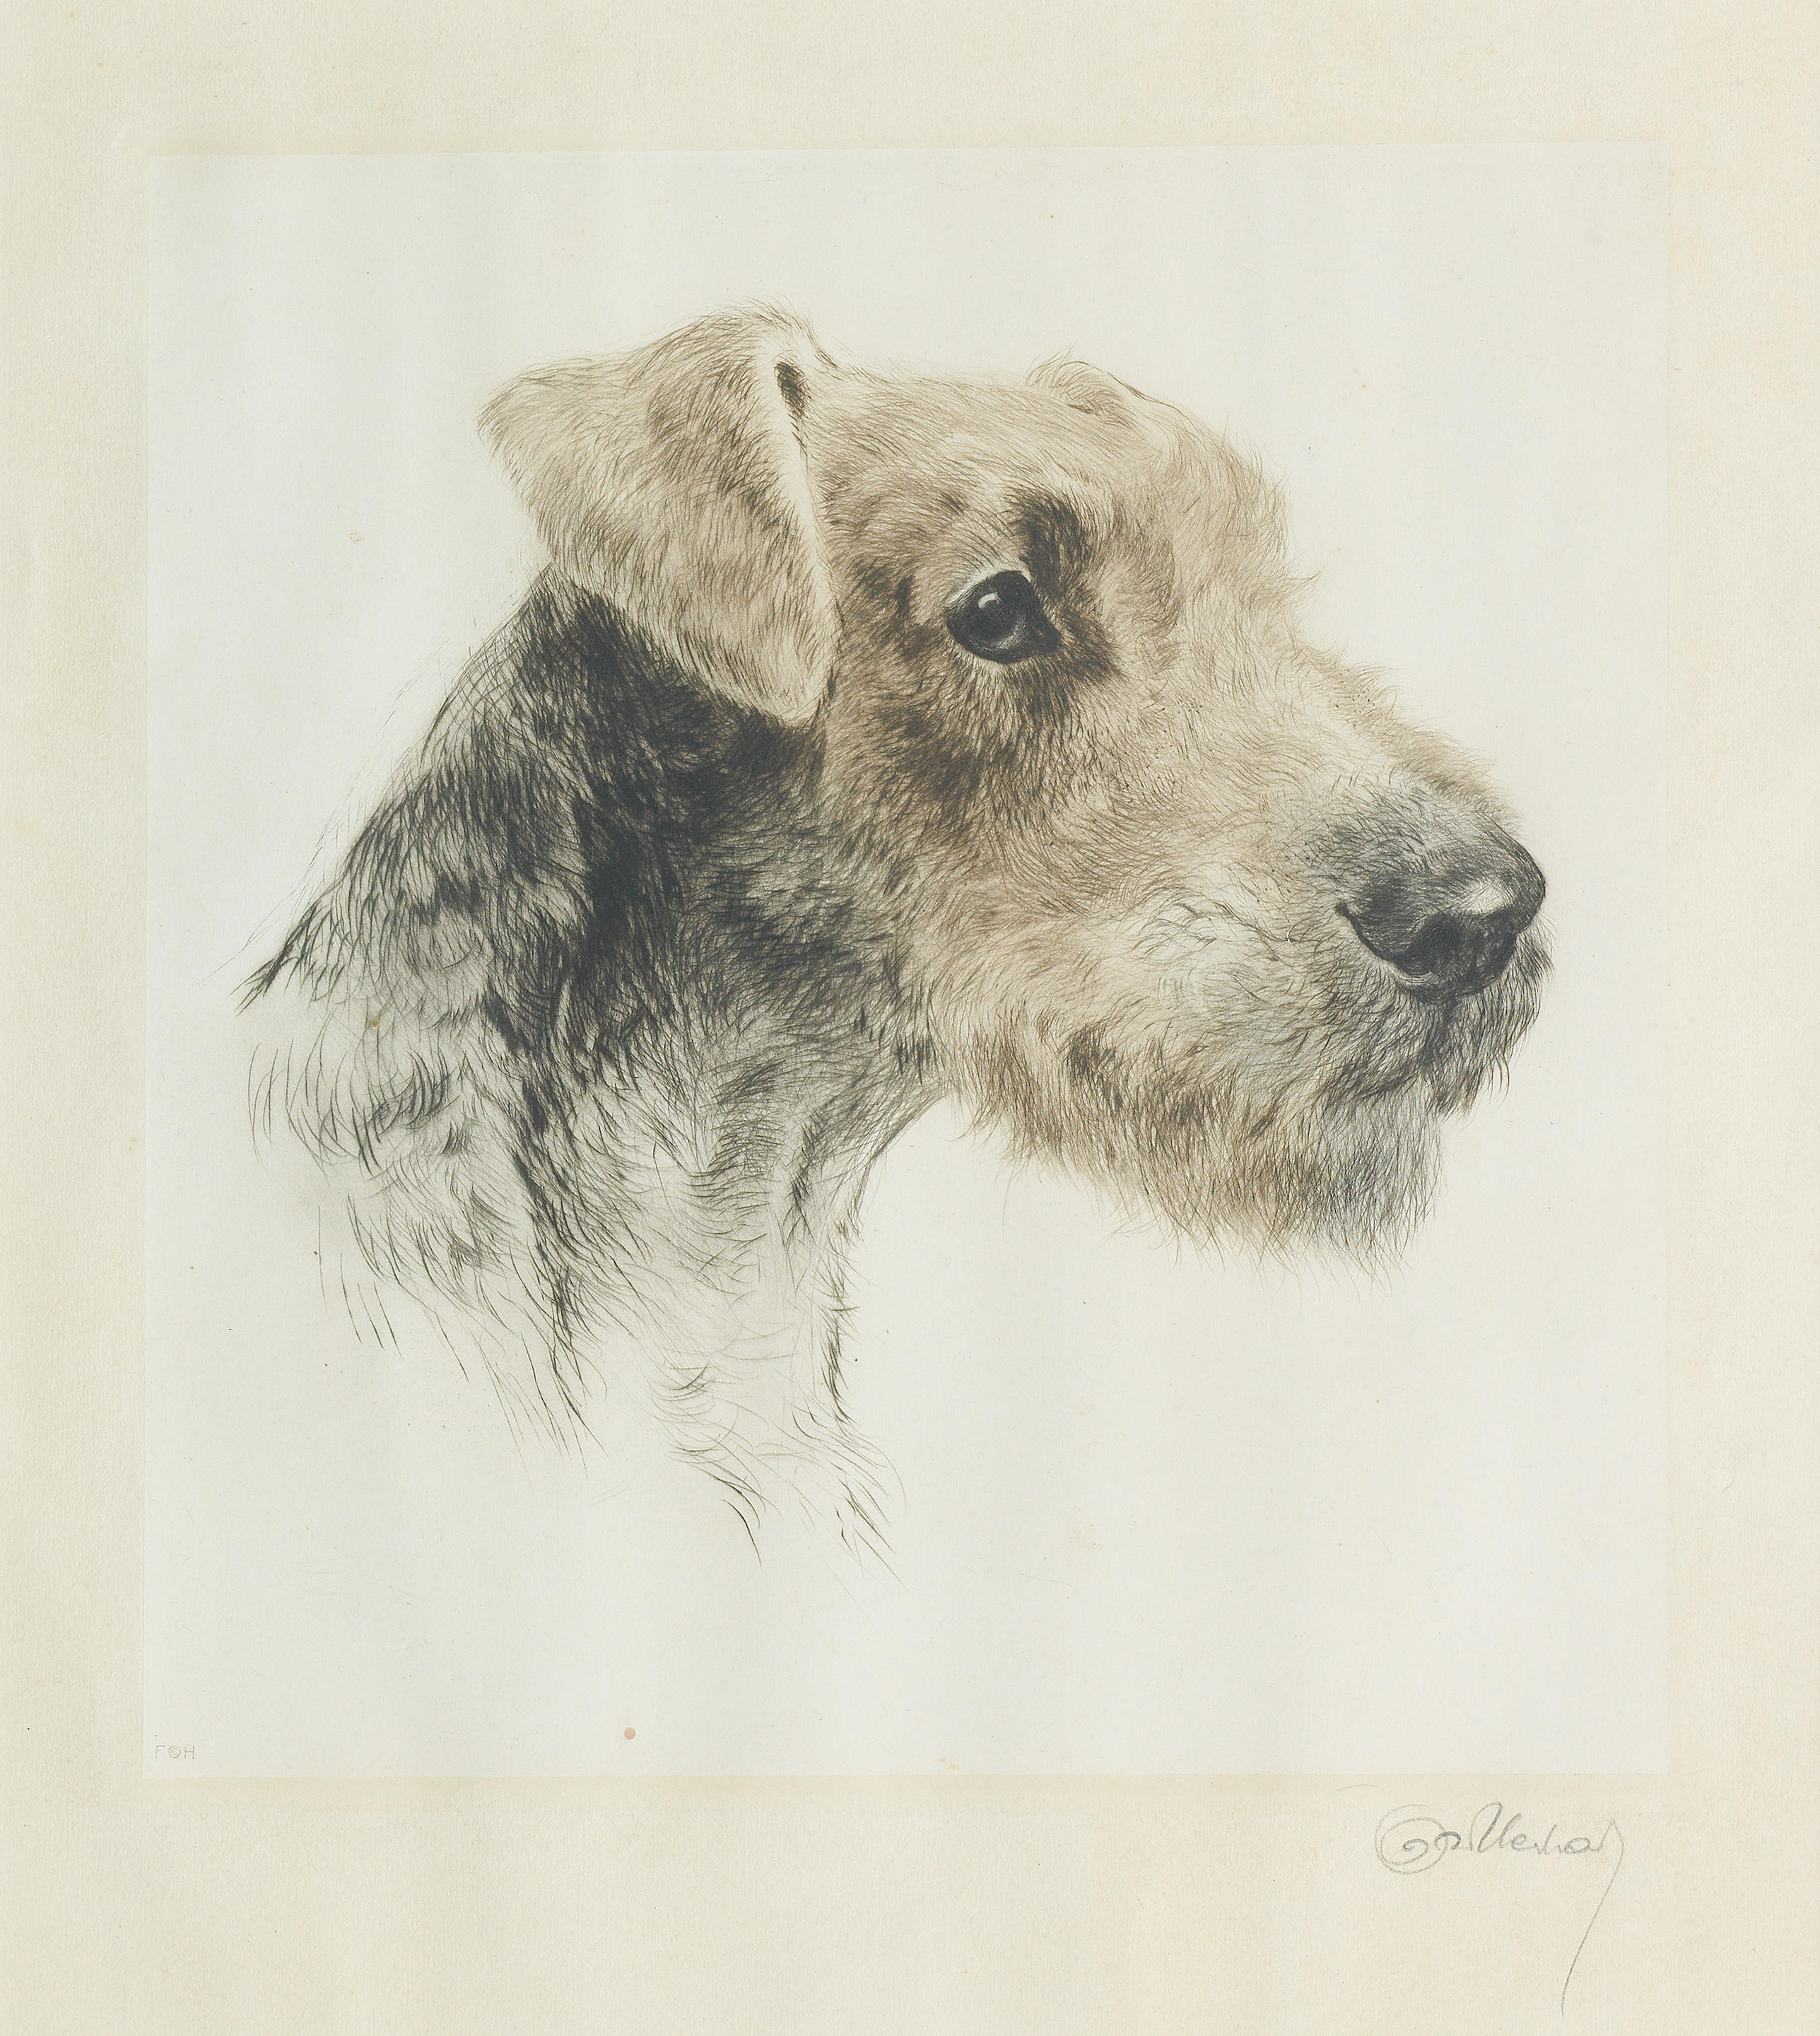 Click to see full size: A dry-point aquatint etching of An Airedale Terrier by Kurt Meyer Eberhardt (German, 1895 - 1957)